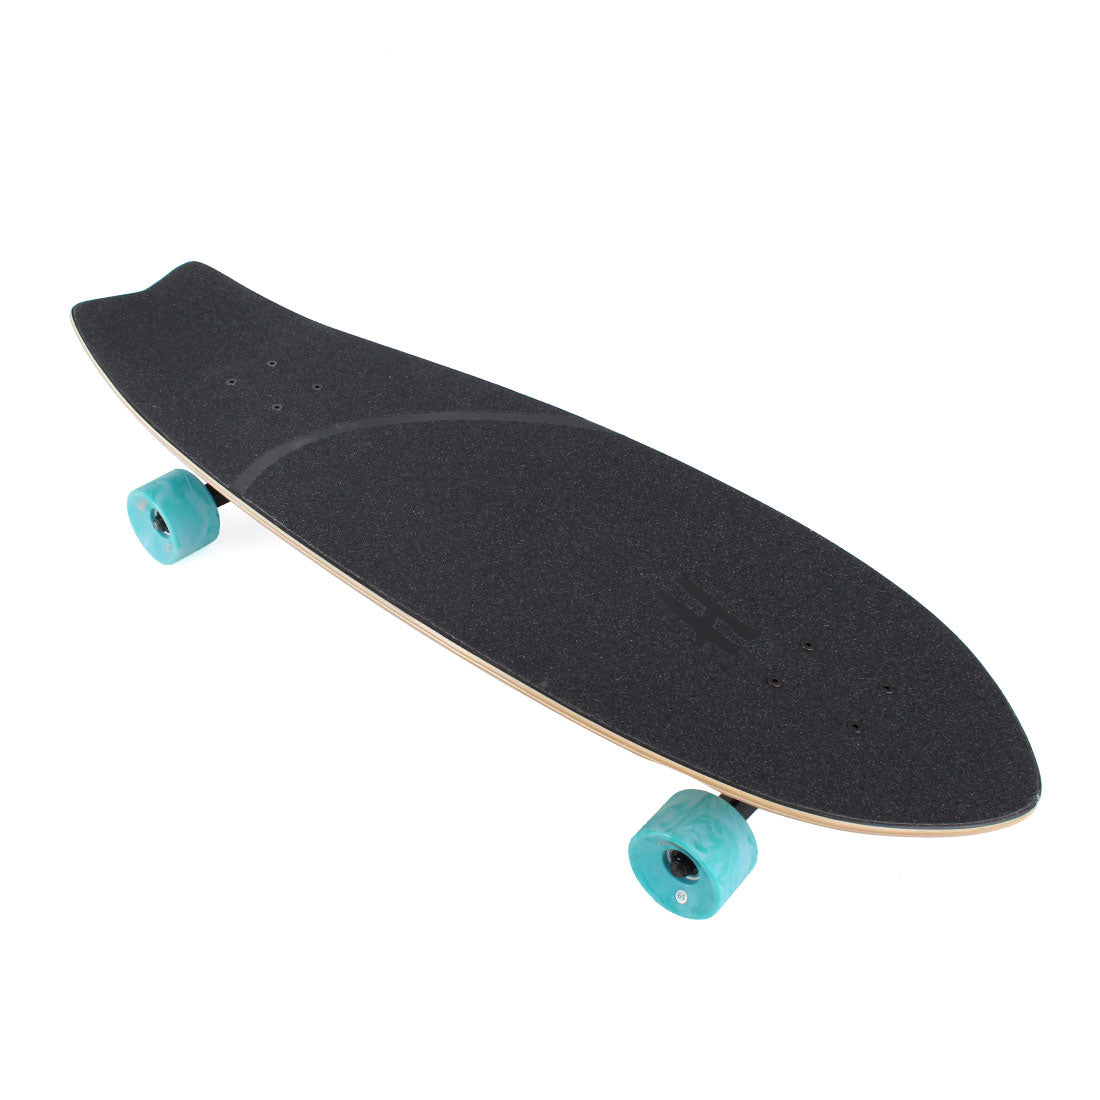 Holiday Surf Skate 31 Complete - Midnight Benny Skateboard Compl Carving and Specialty